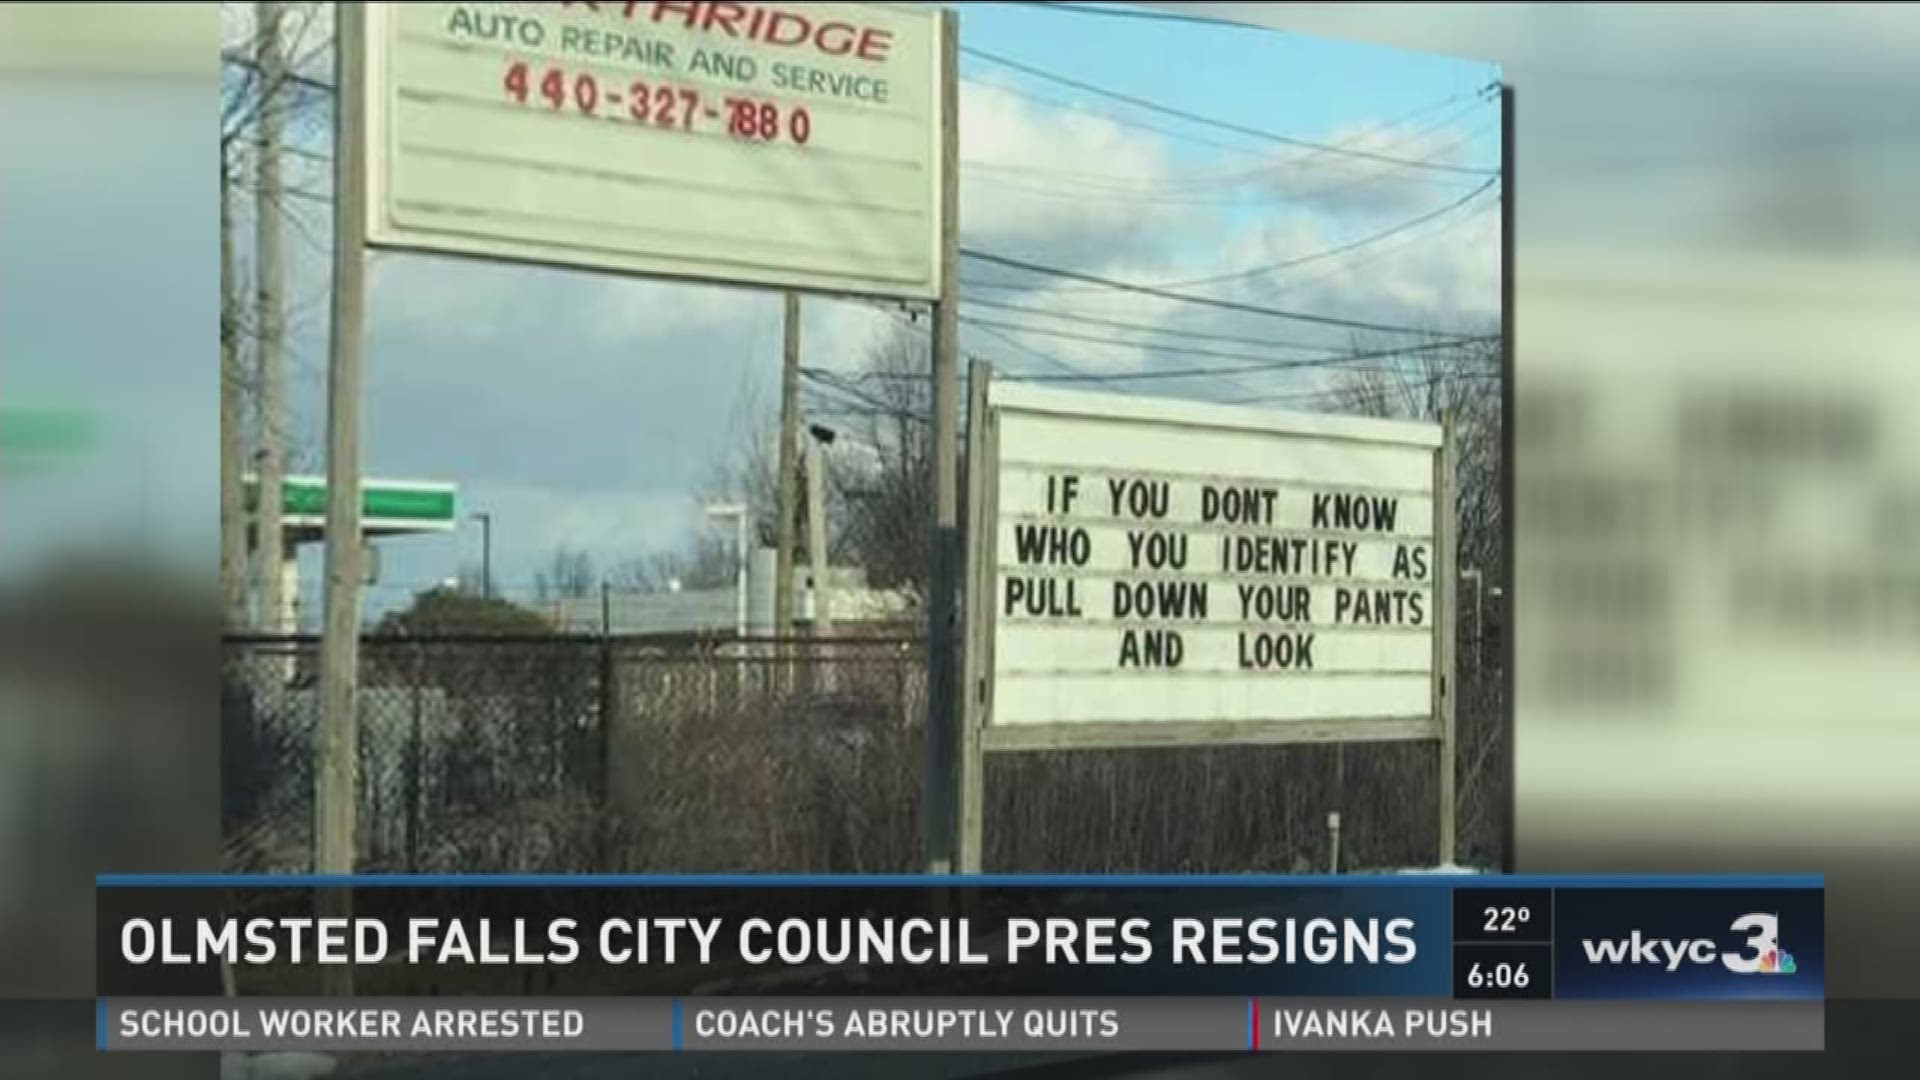 Olmsted Falls City Council Pres resigns